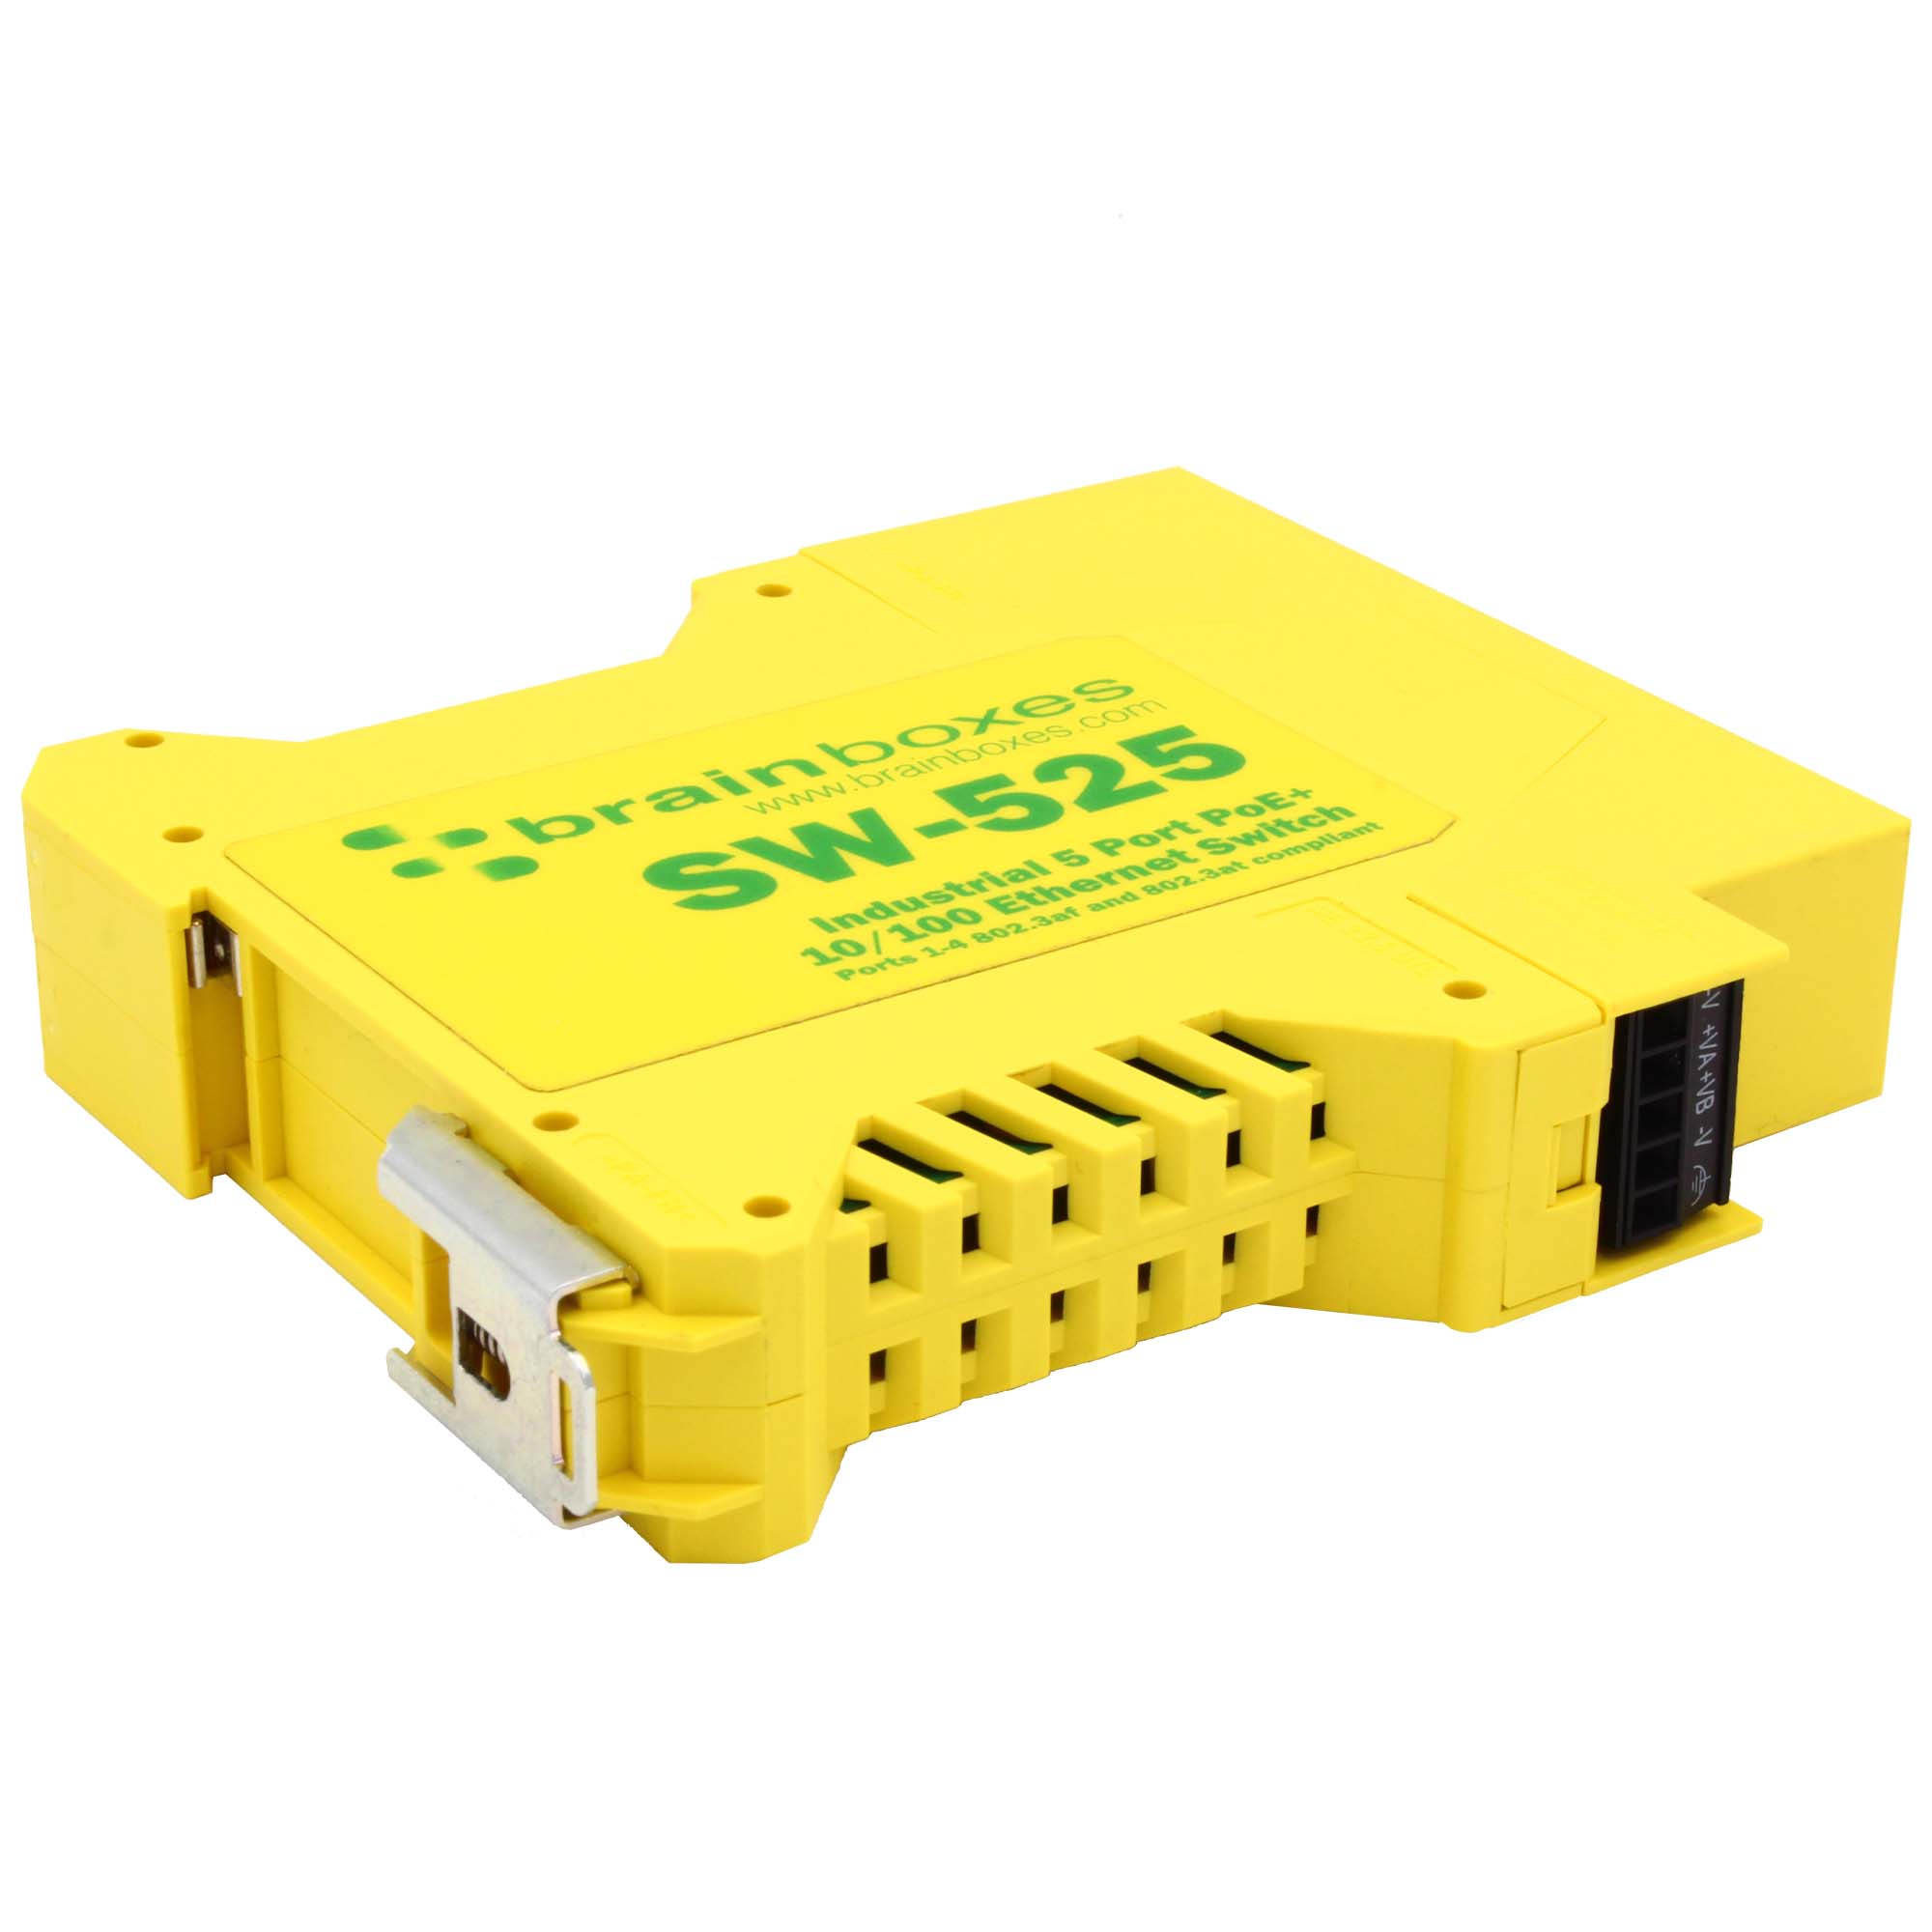 SW-525 Industrial 5 Port PoE+ 10/100 Ethernet Switch - Brainboxes